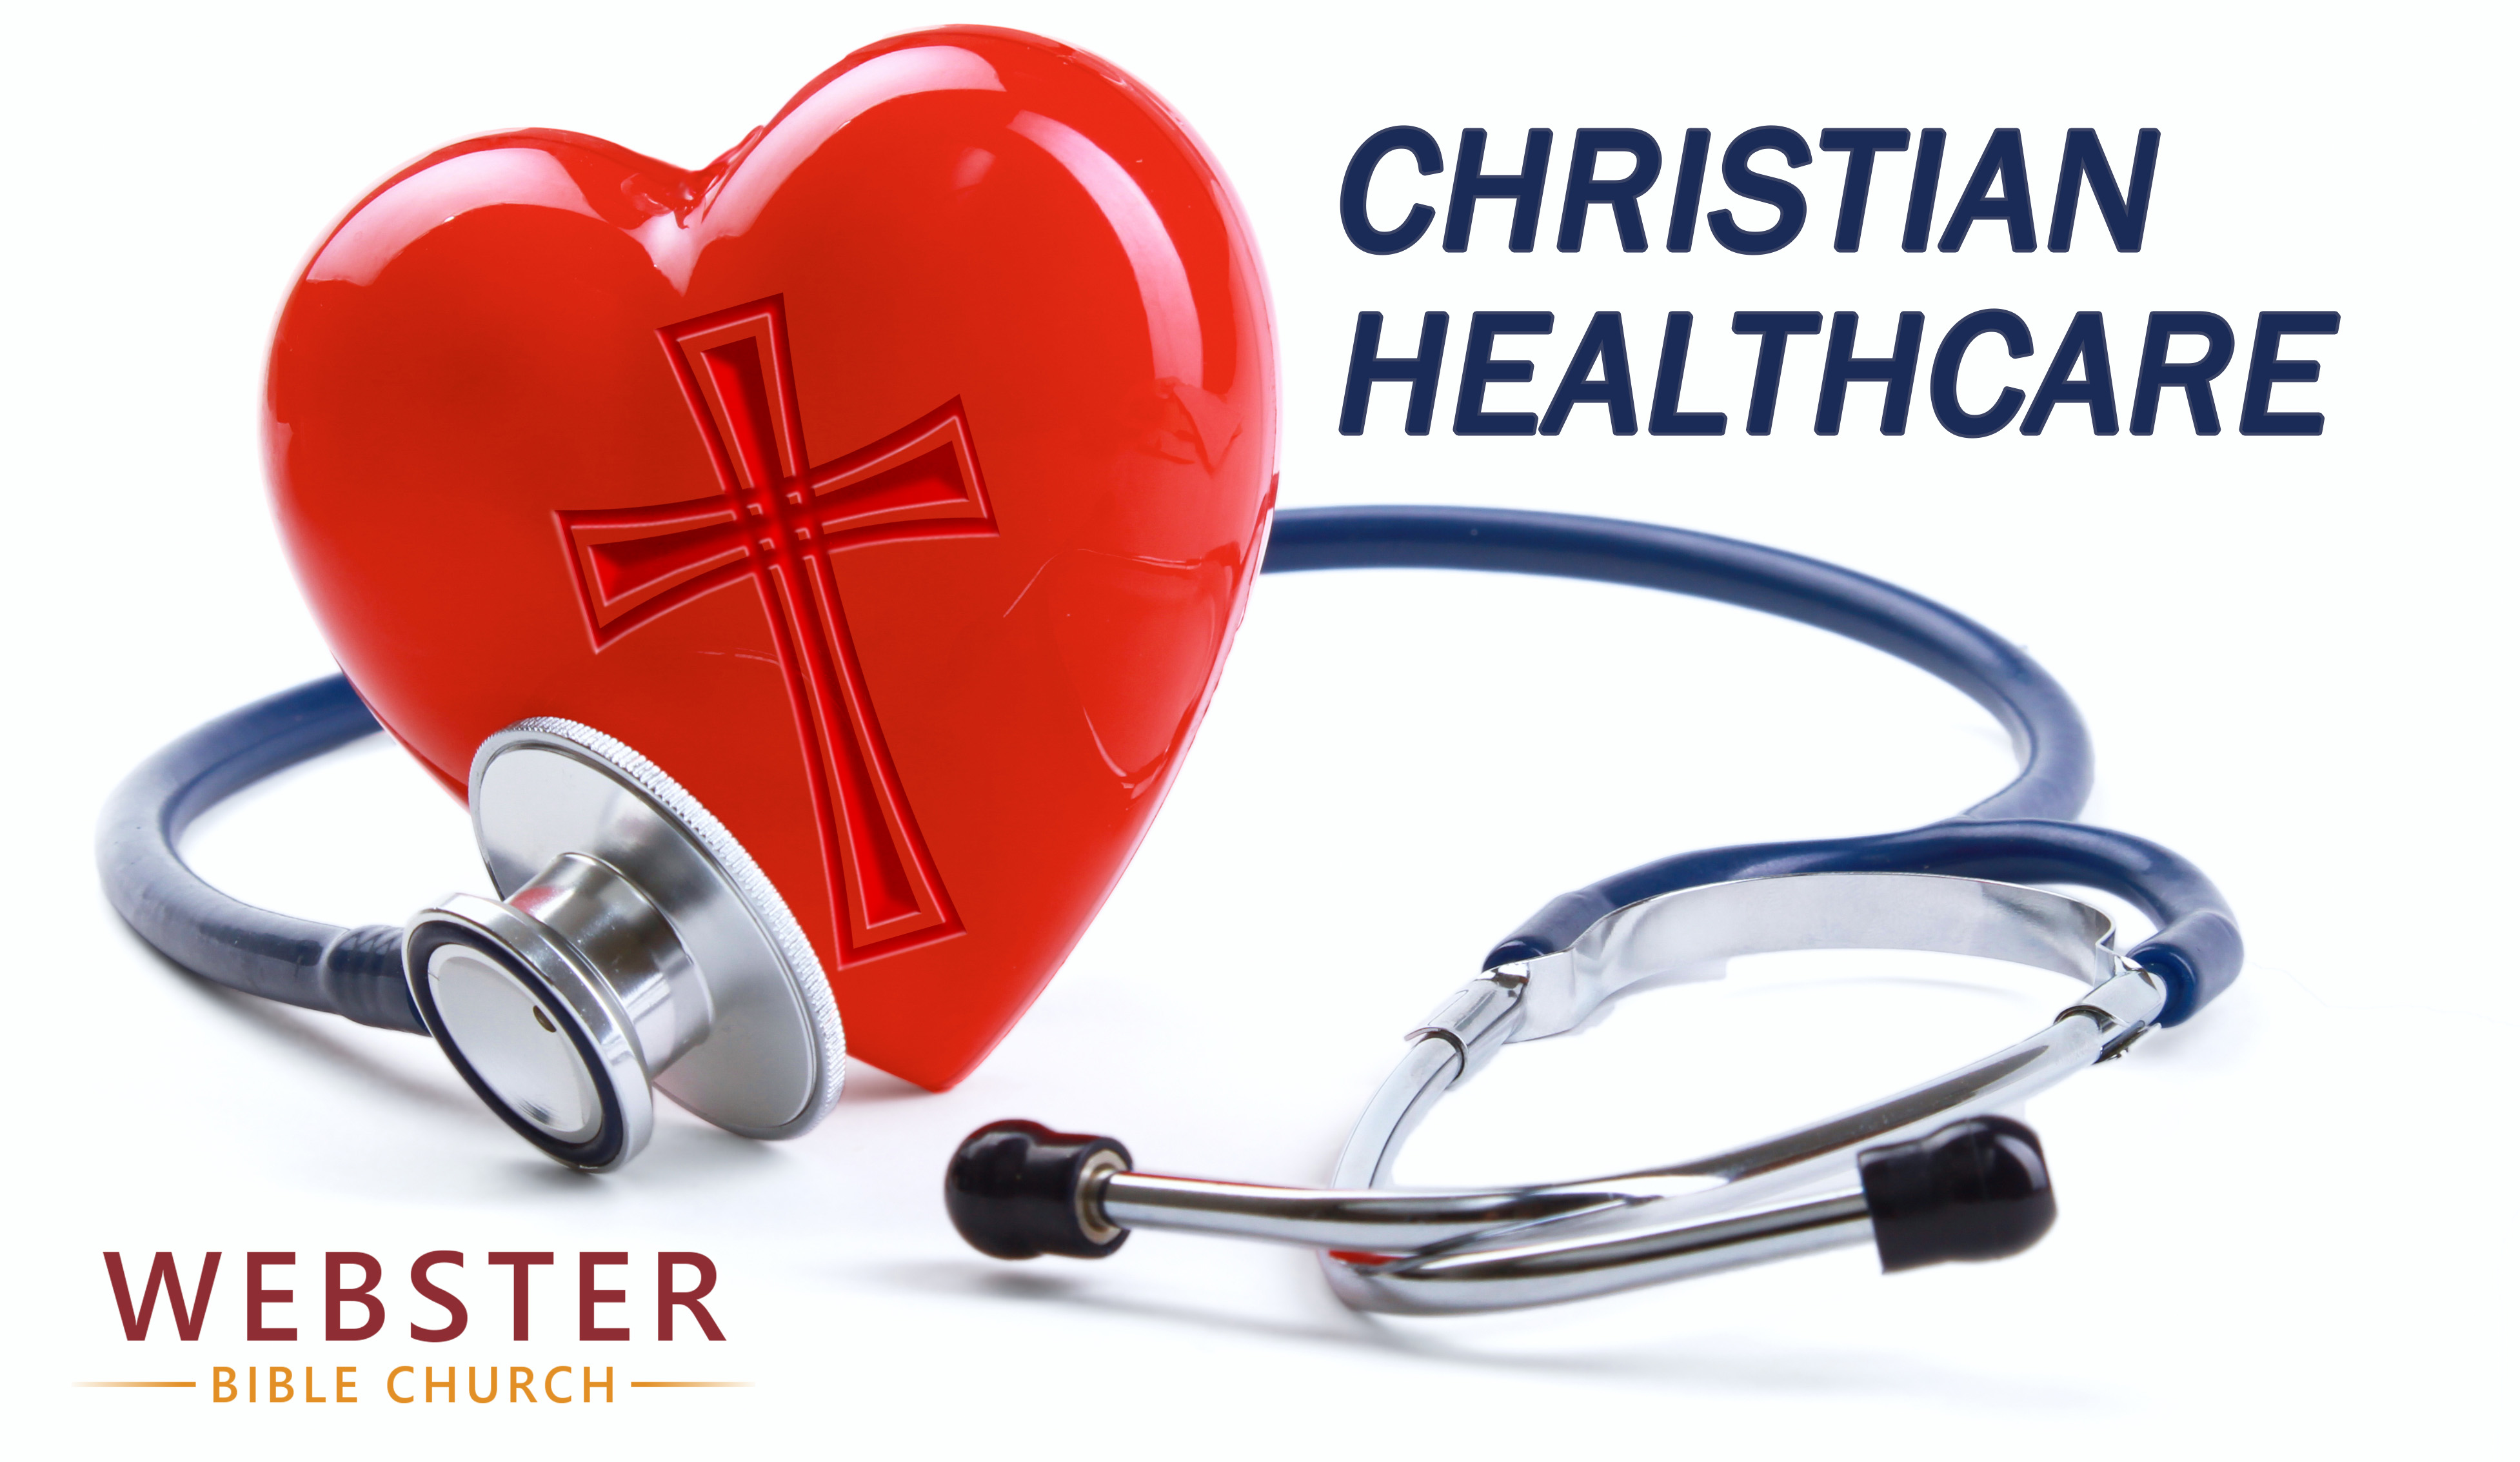 Christian Healthcare - Diagnostic Question #4: Are the Spiritual Disciplines Increasingly Important to You?